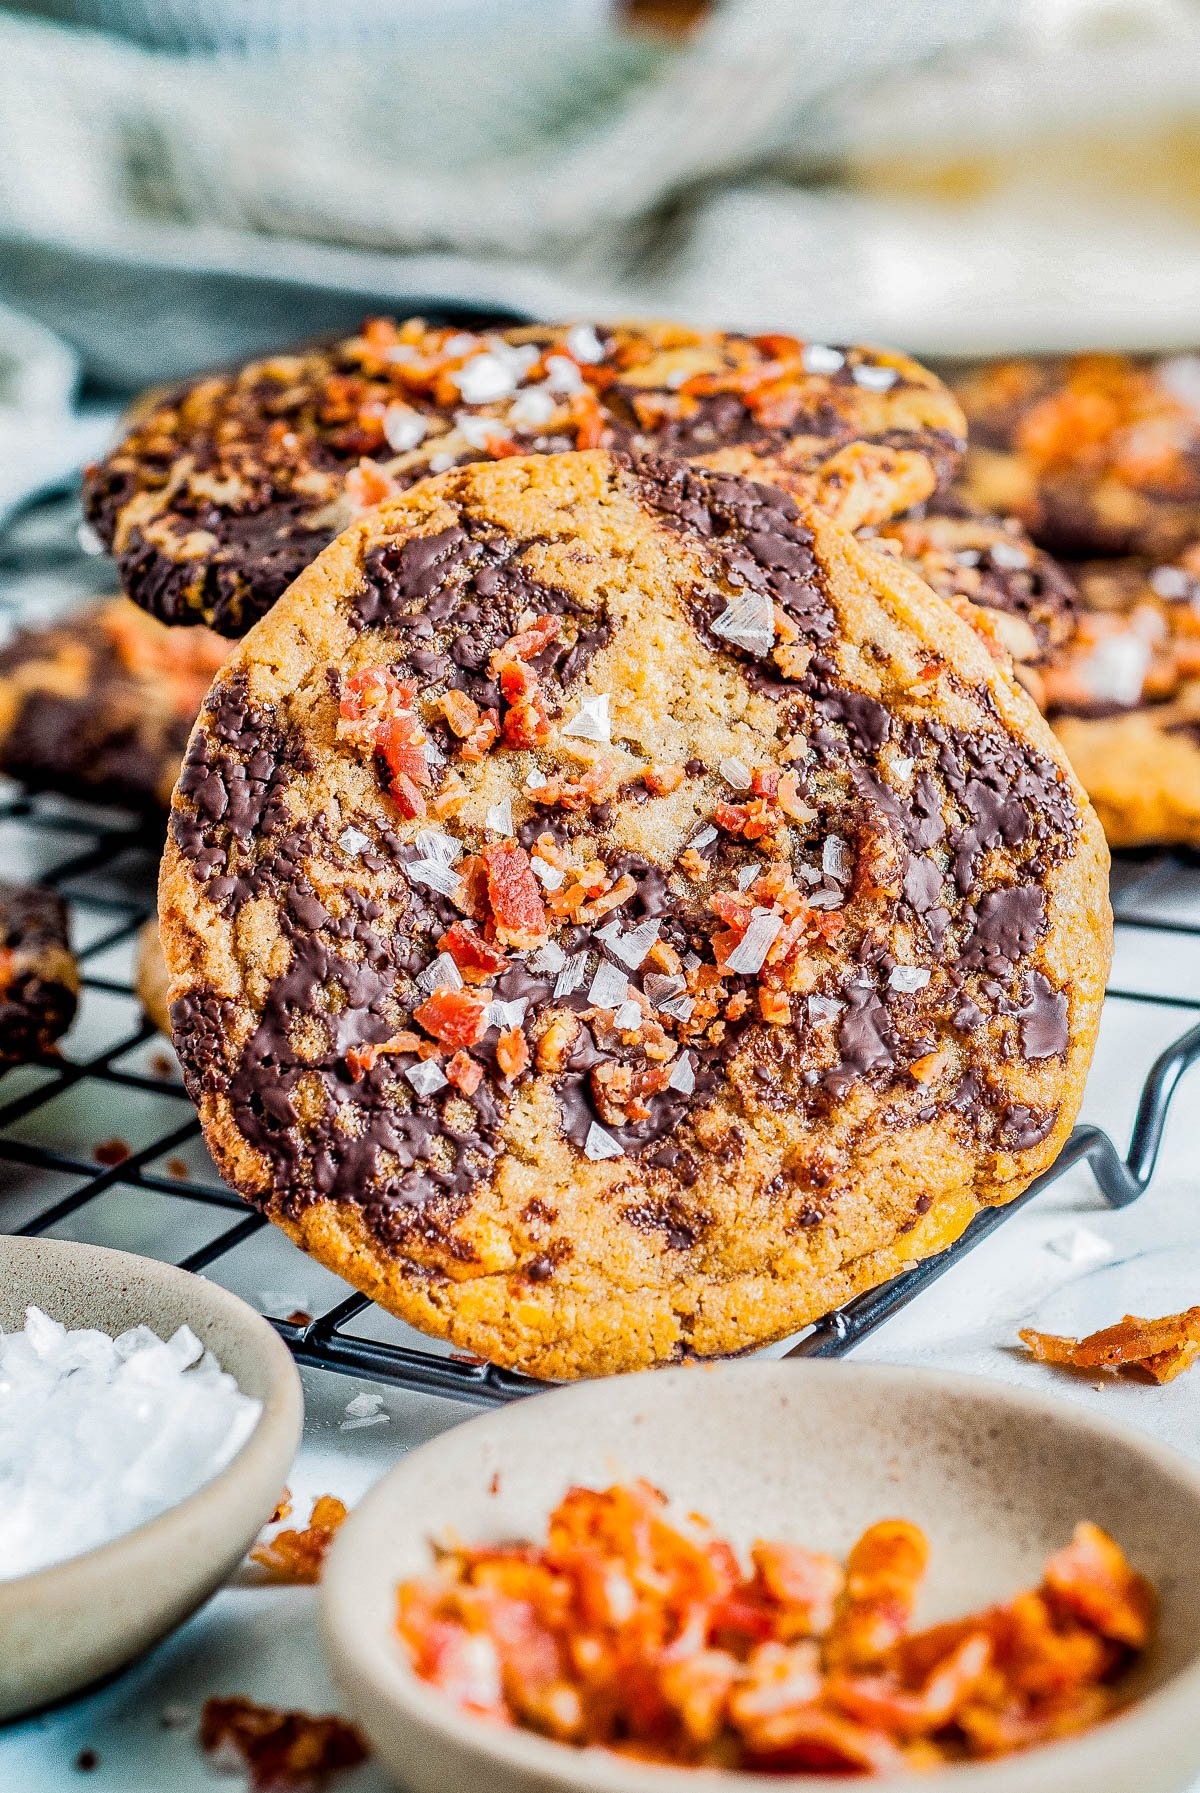 Bacon Chocolate Chip Cookies - These decadent and indulgent chocolate chip cookies are the perfect balance of savory, salty and sweet in every delectable chewy bite! With crispy bacon, butterscotch chips, tons of melted chocolate, and flaky sea salt, they're a flavor explosion for those bold enough to give them a try! 